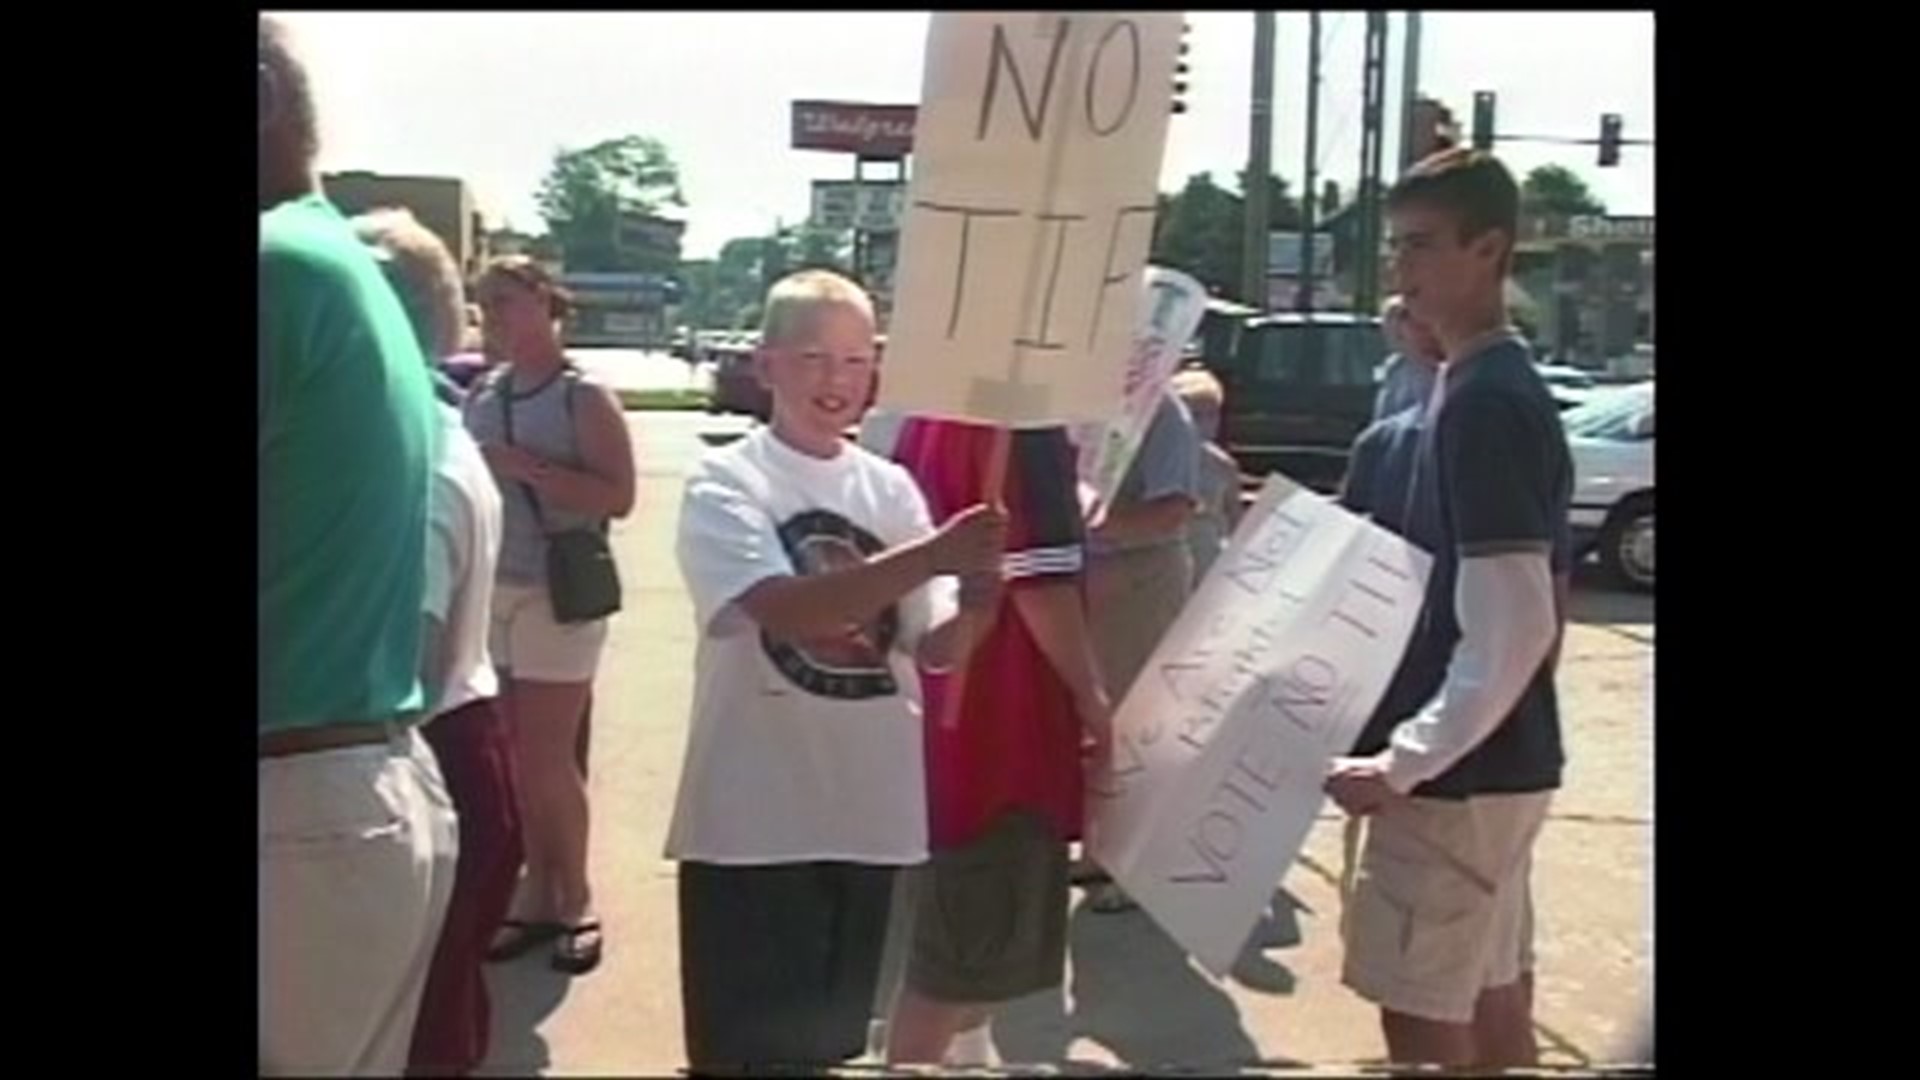 Moline residents push back against plan to tear down homes, build stores #TBT